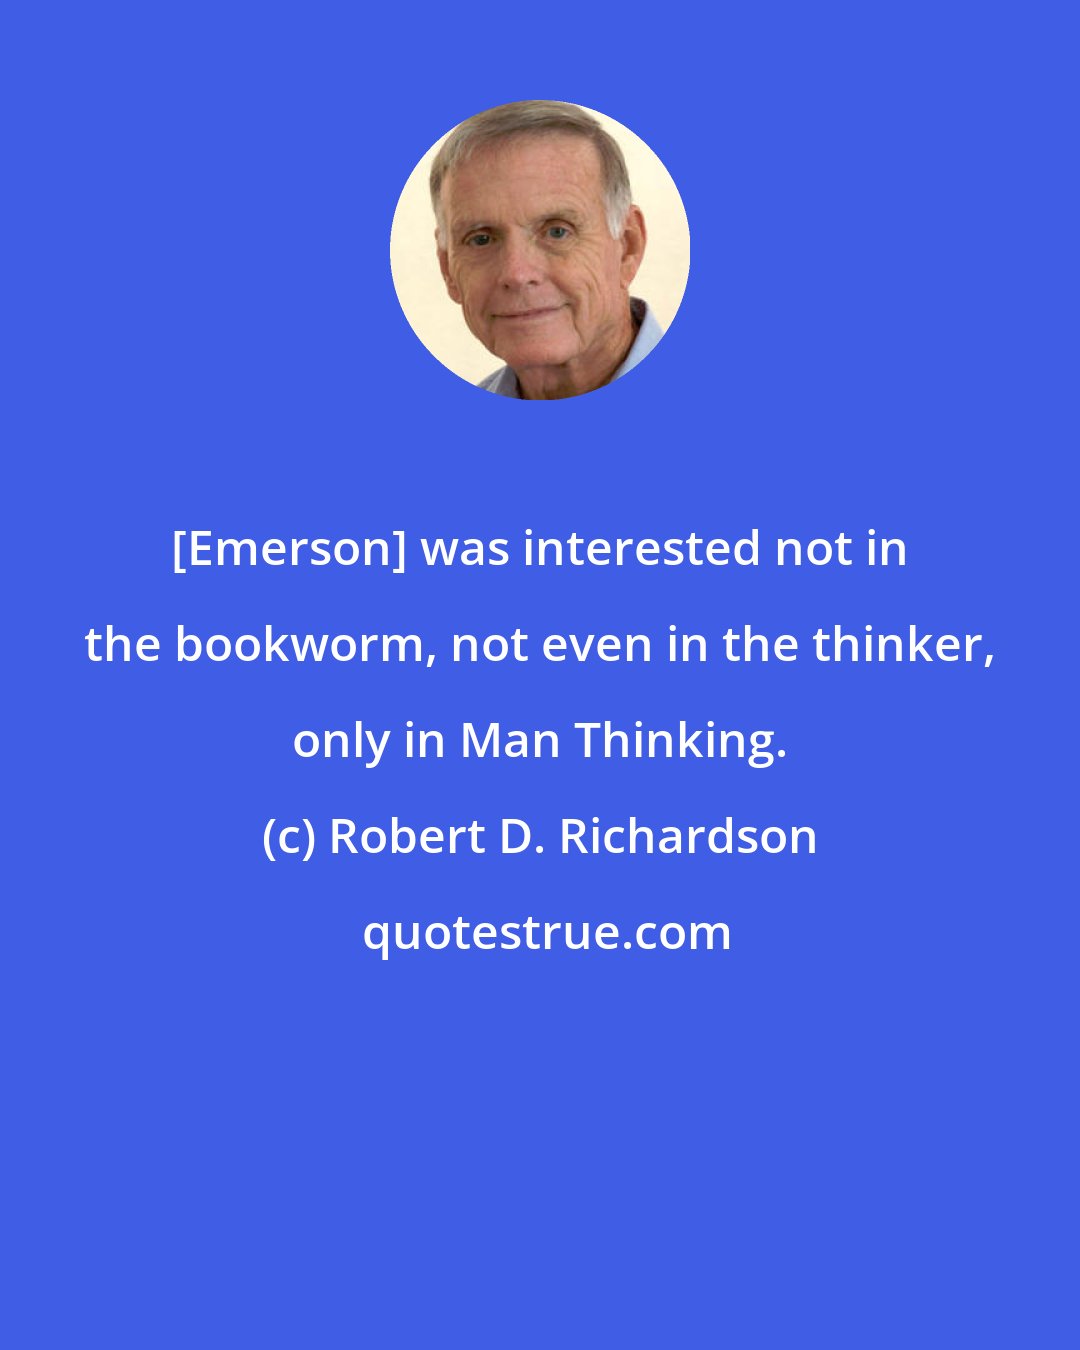 Robert D. Richardson: [Emerson] was interested not in the bookworm, not even in the thinker, only in Man Thinking.